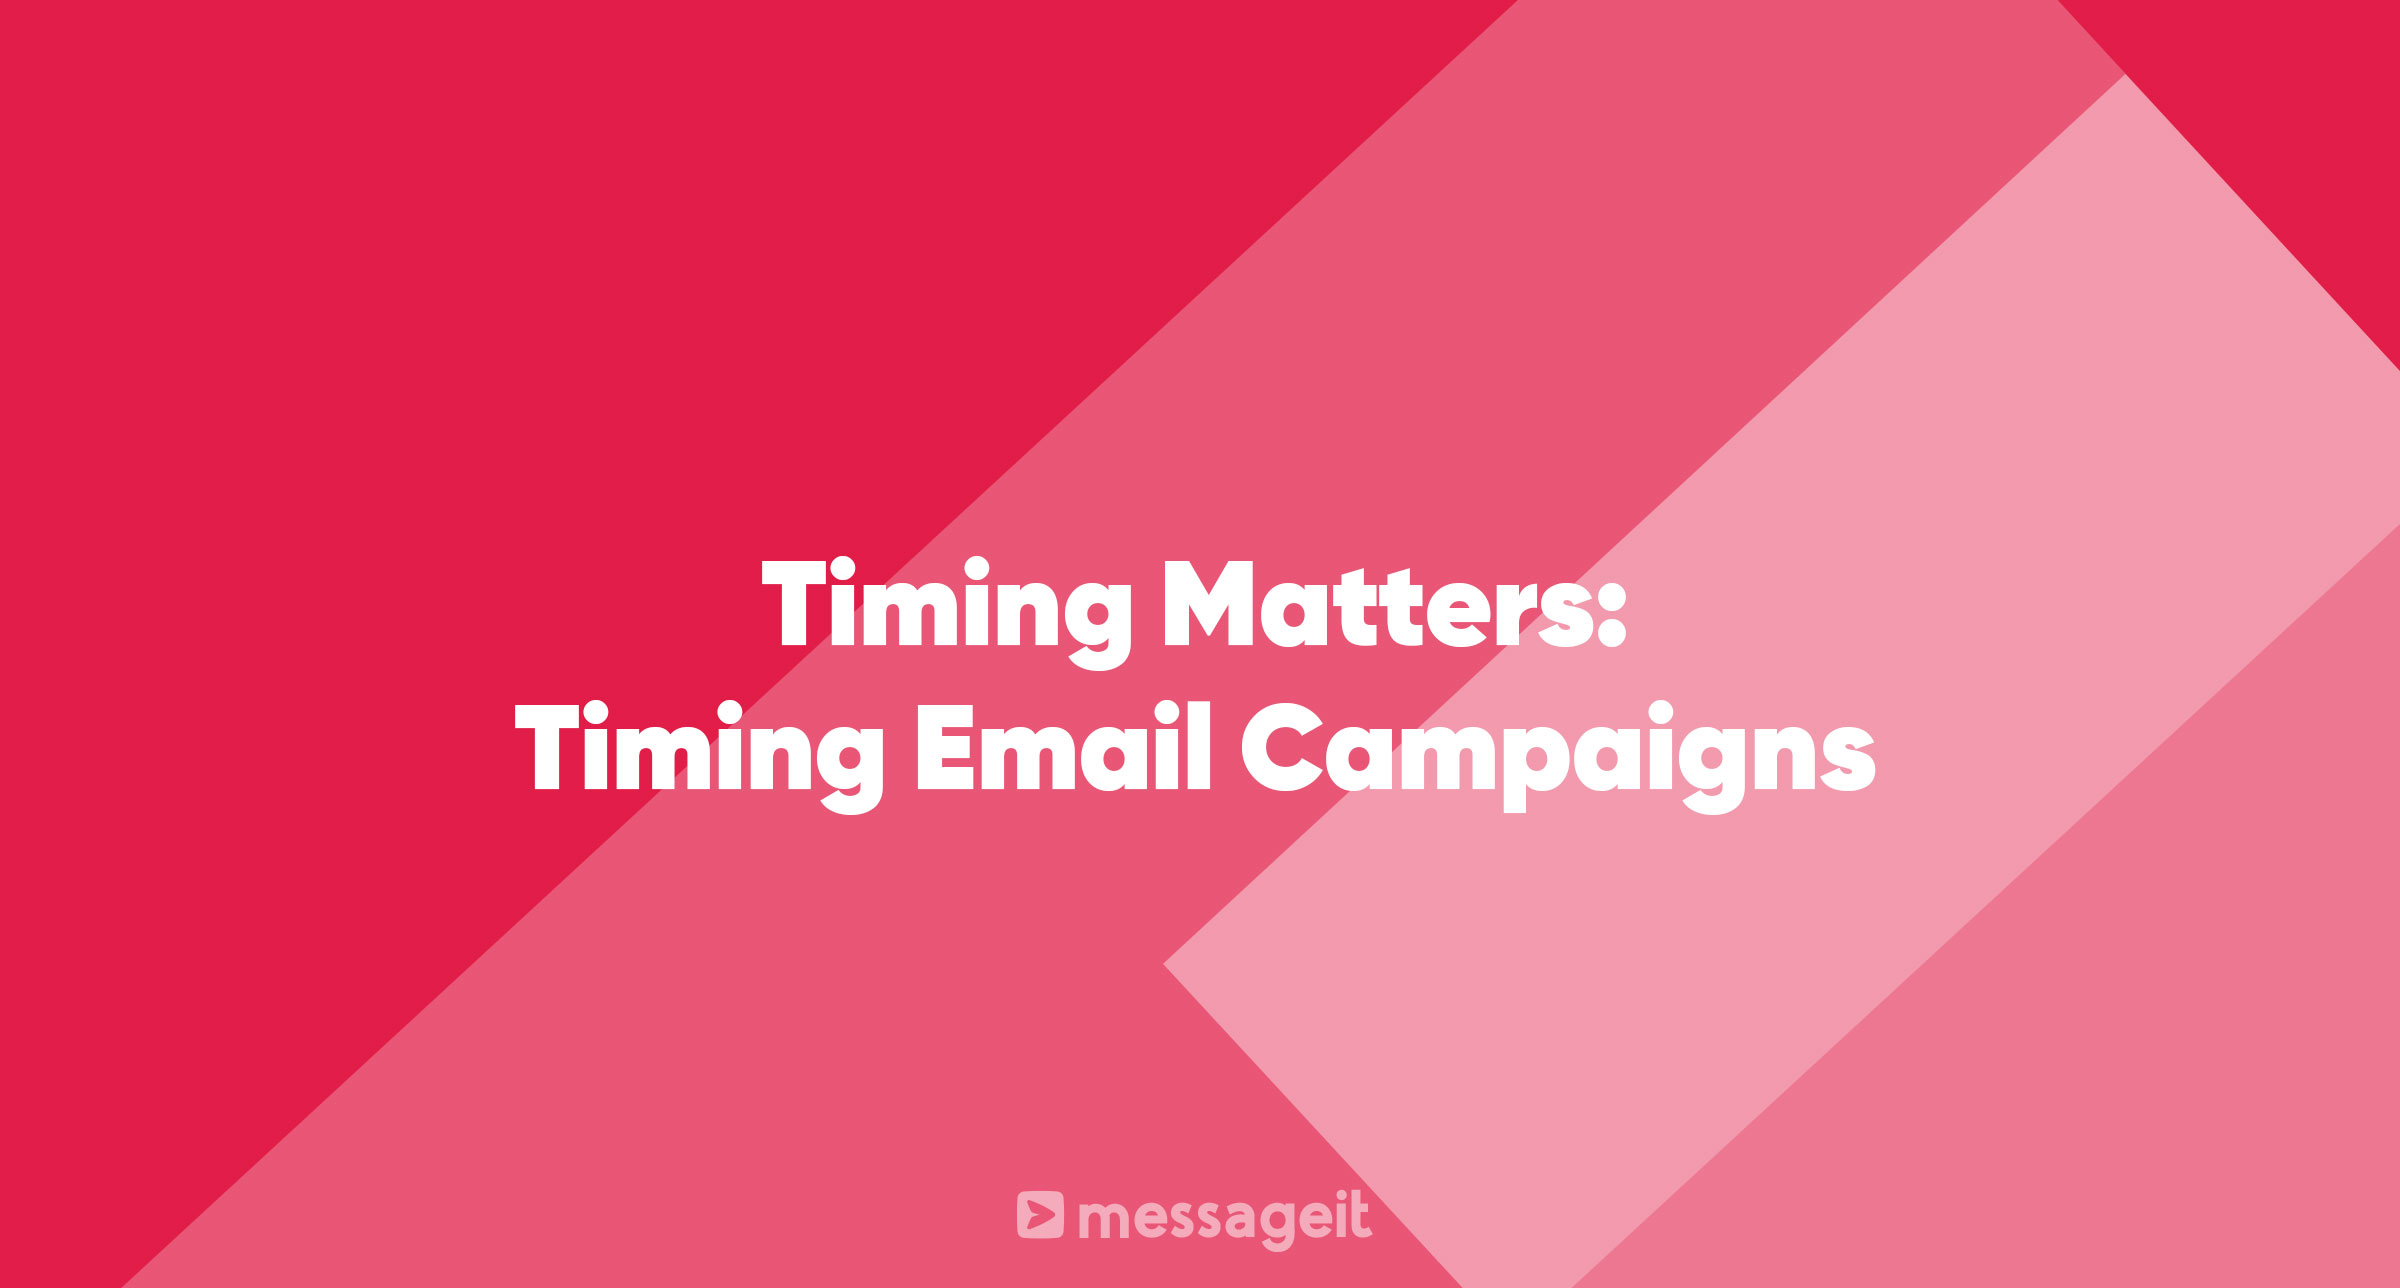 Article | Timing Matters: Timing Email Campaigns